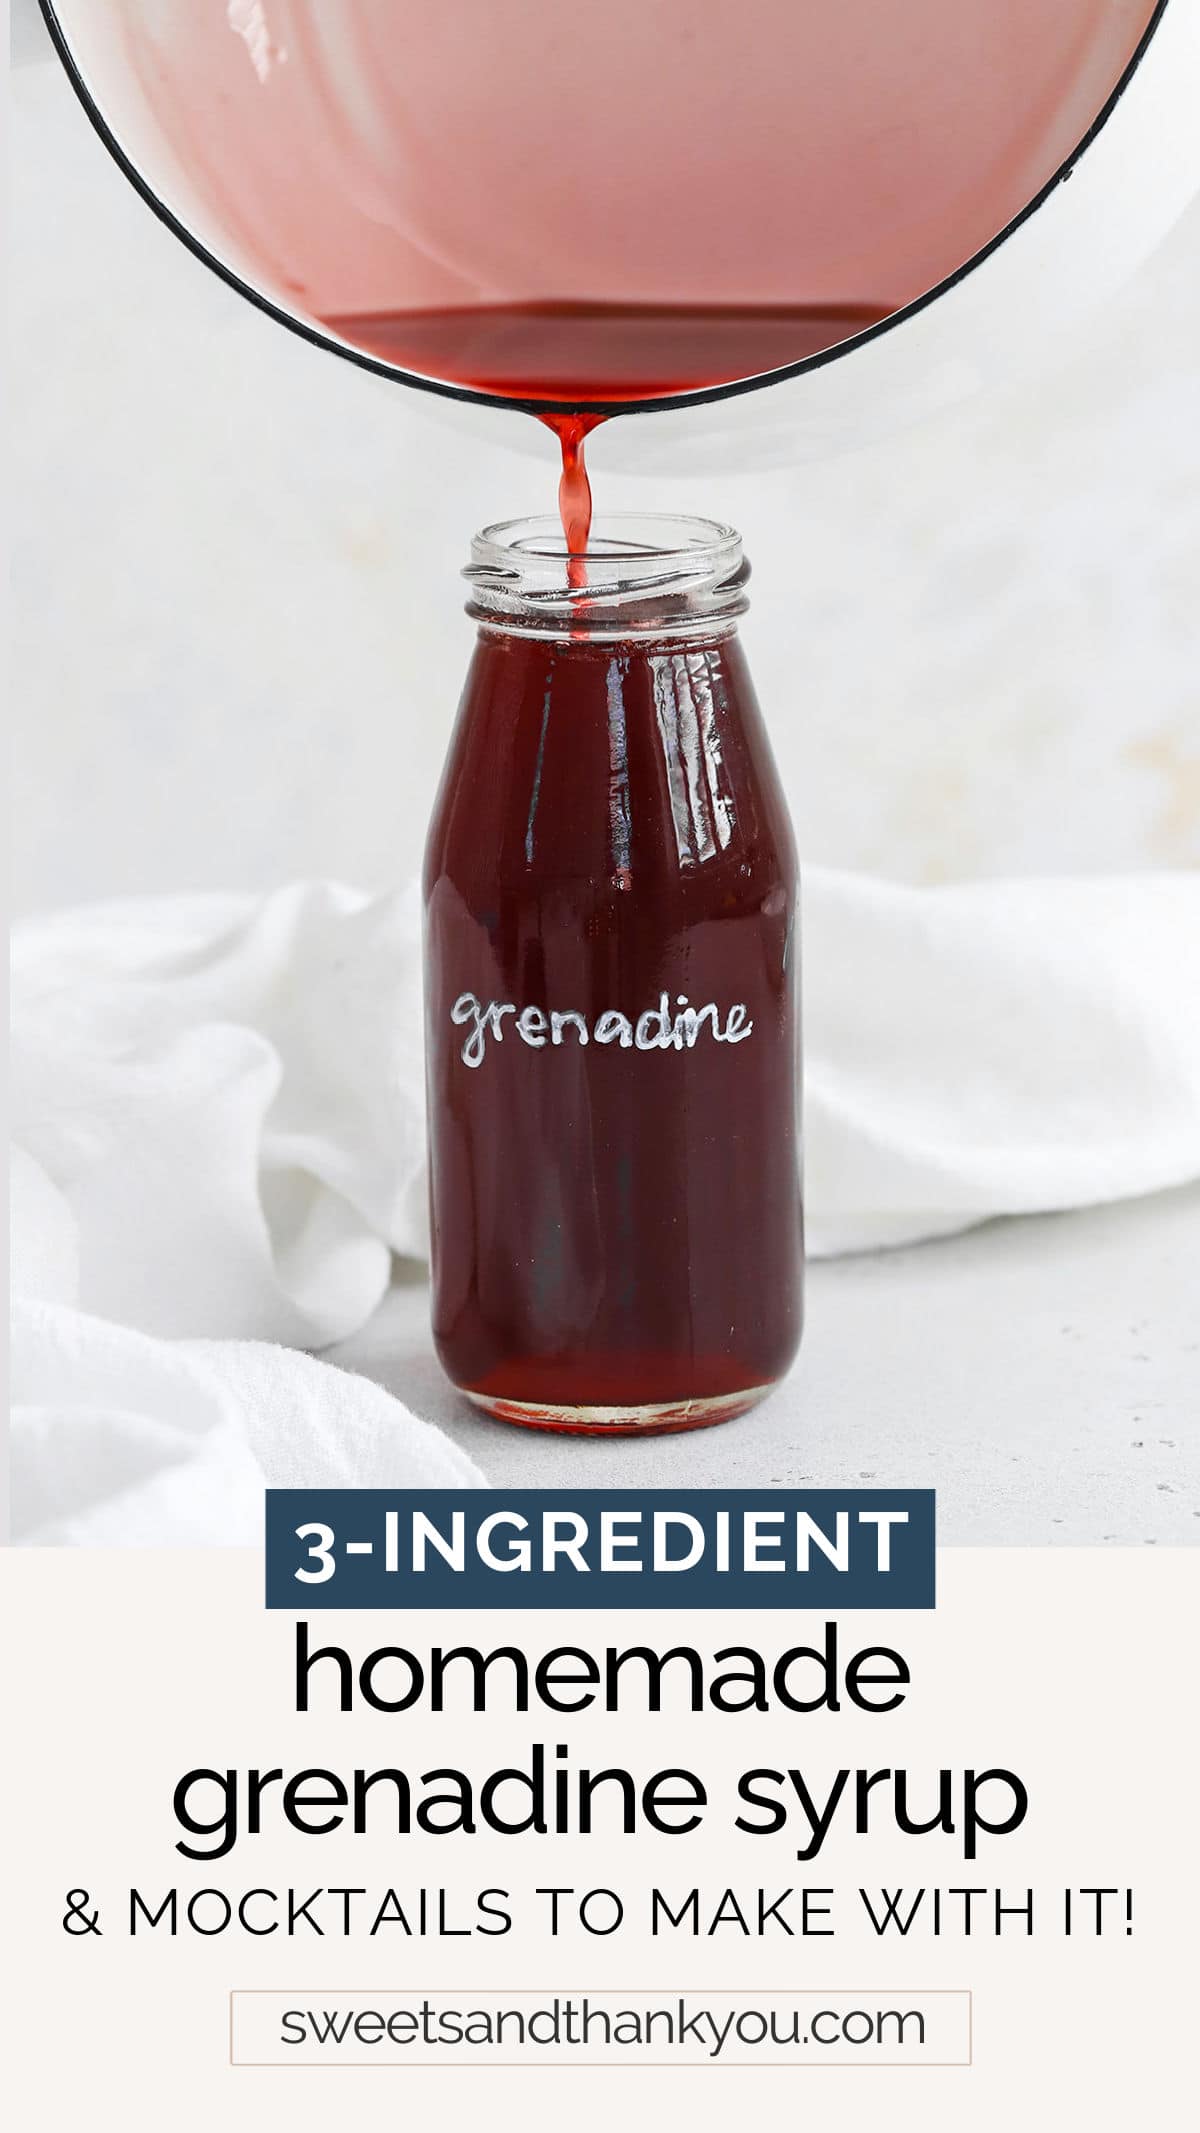 How To Make Homemade Grenadine Syrup - This grenadine syrup recipe couldn't be easier! It takes 3 ingredients and just a few minutes. You'll love the gorgeous color and flavor it adds to your favorite drinks! // How to make grenadine syrup // grenadine recipe // what’s in grenadine // grenadine ingredients // is grenadine cherry or pomegranate // grenadine mocktails // grenadine drinks // mocktail recipes // non alcoholic drinks //